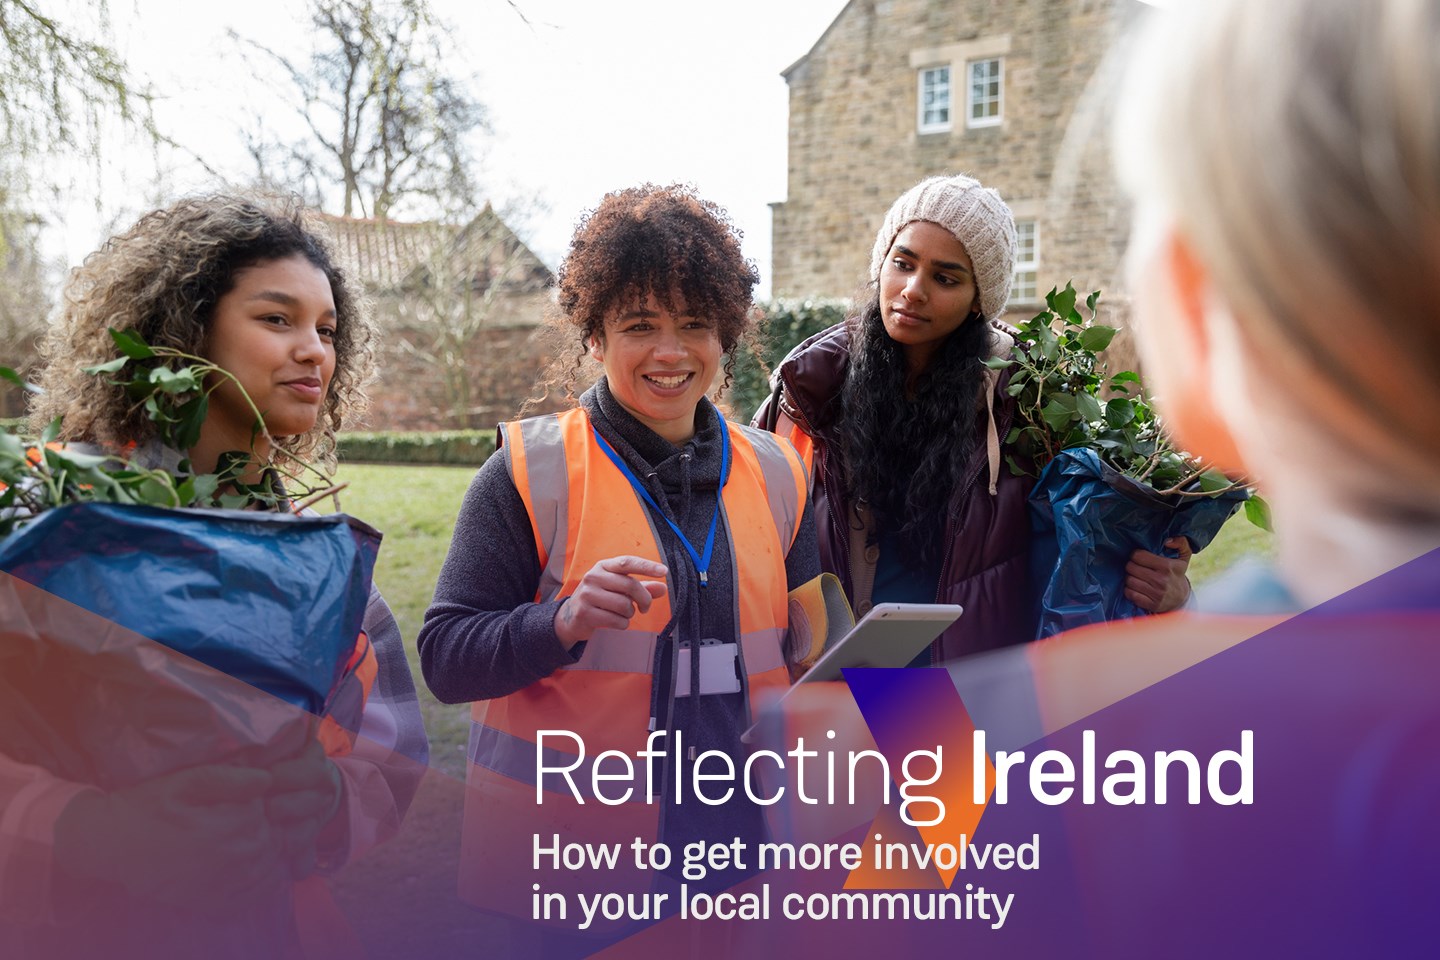 Two women holding plants and one woman wearing a hi-vest and holding a tablet, talking to another woman in a back garden, text on image 'Reflecting Ireland, How to get more involved in your local community'